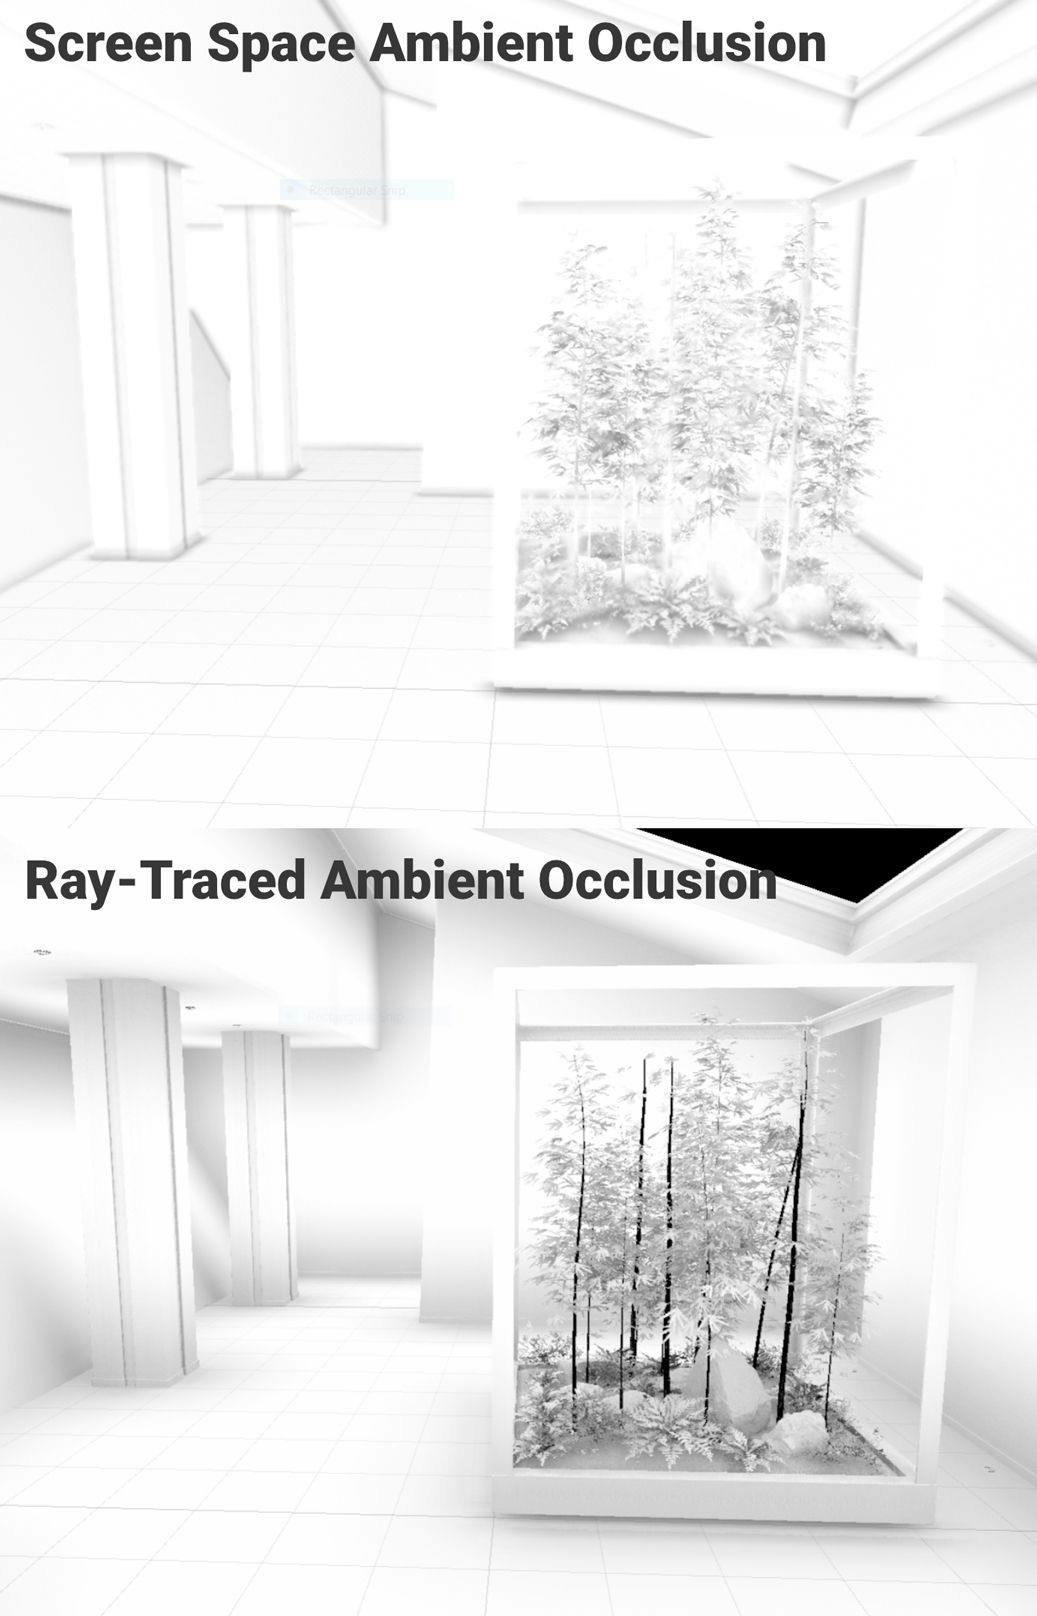 Bildschirmraum-Ambient Occlusion vs. Ray-Traced Ambient Occlusion